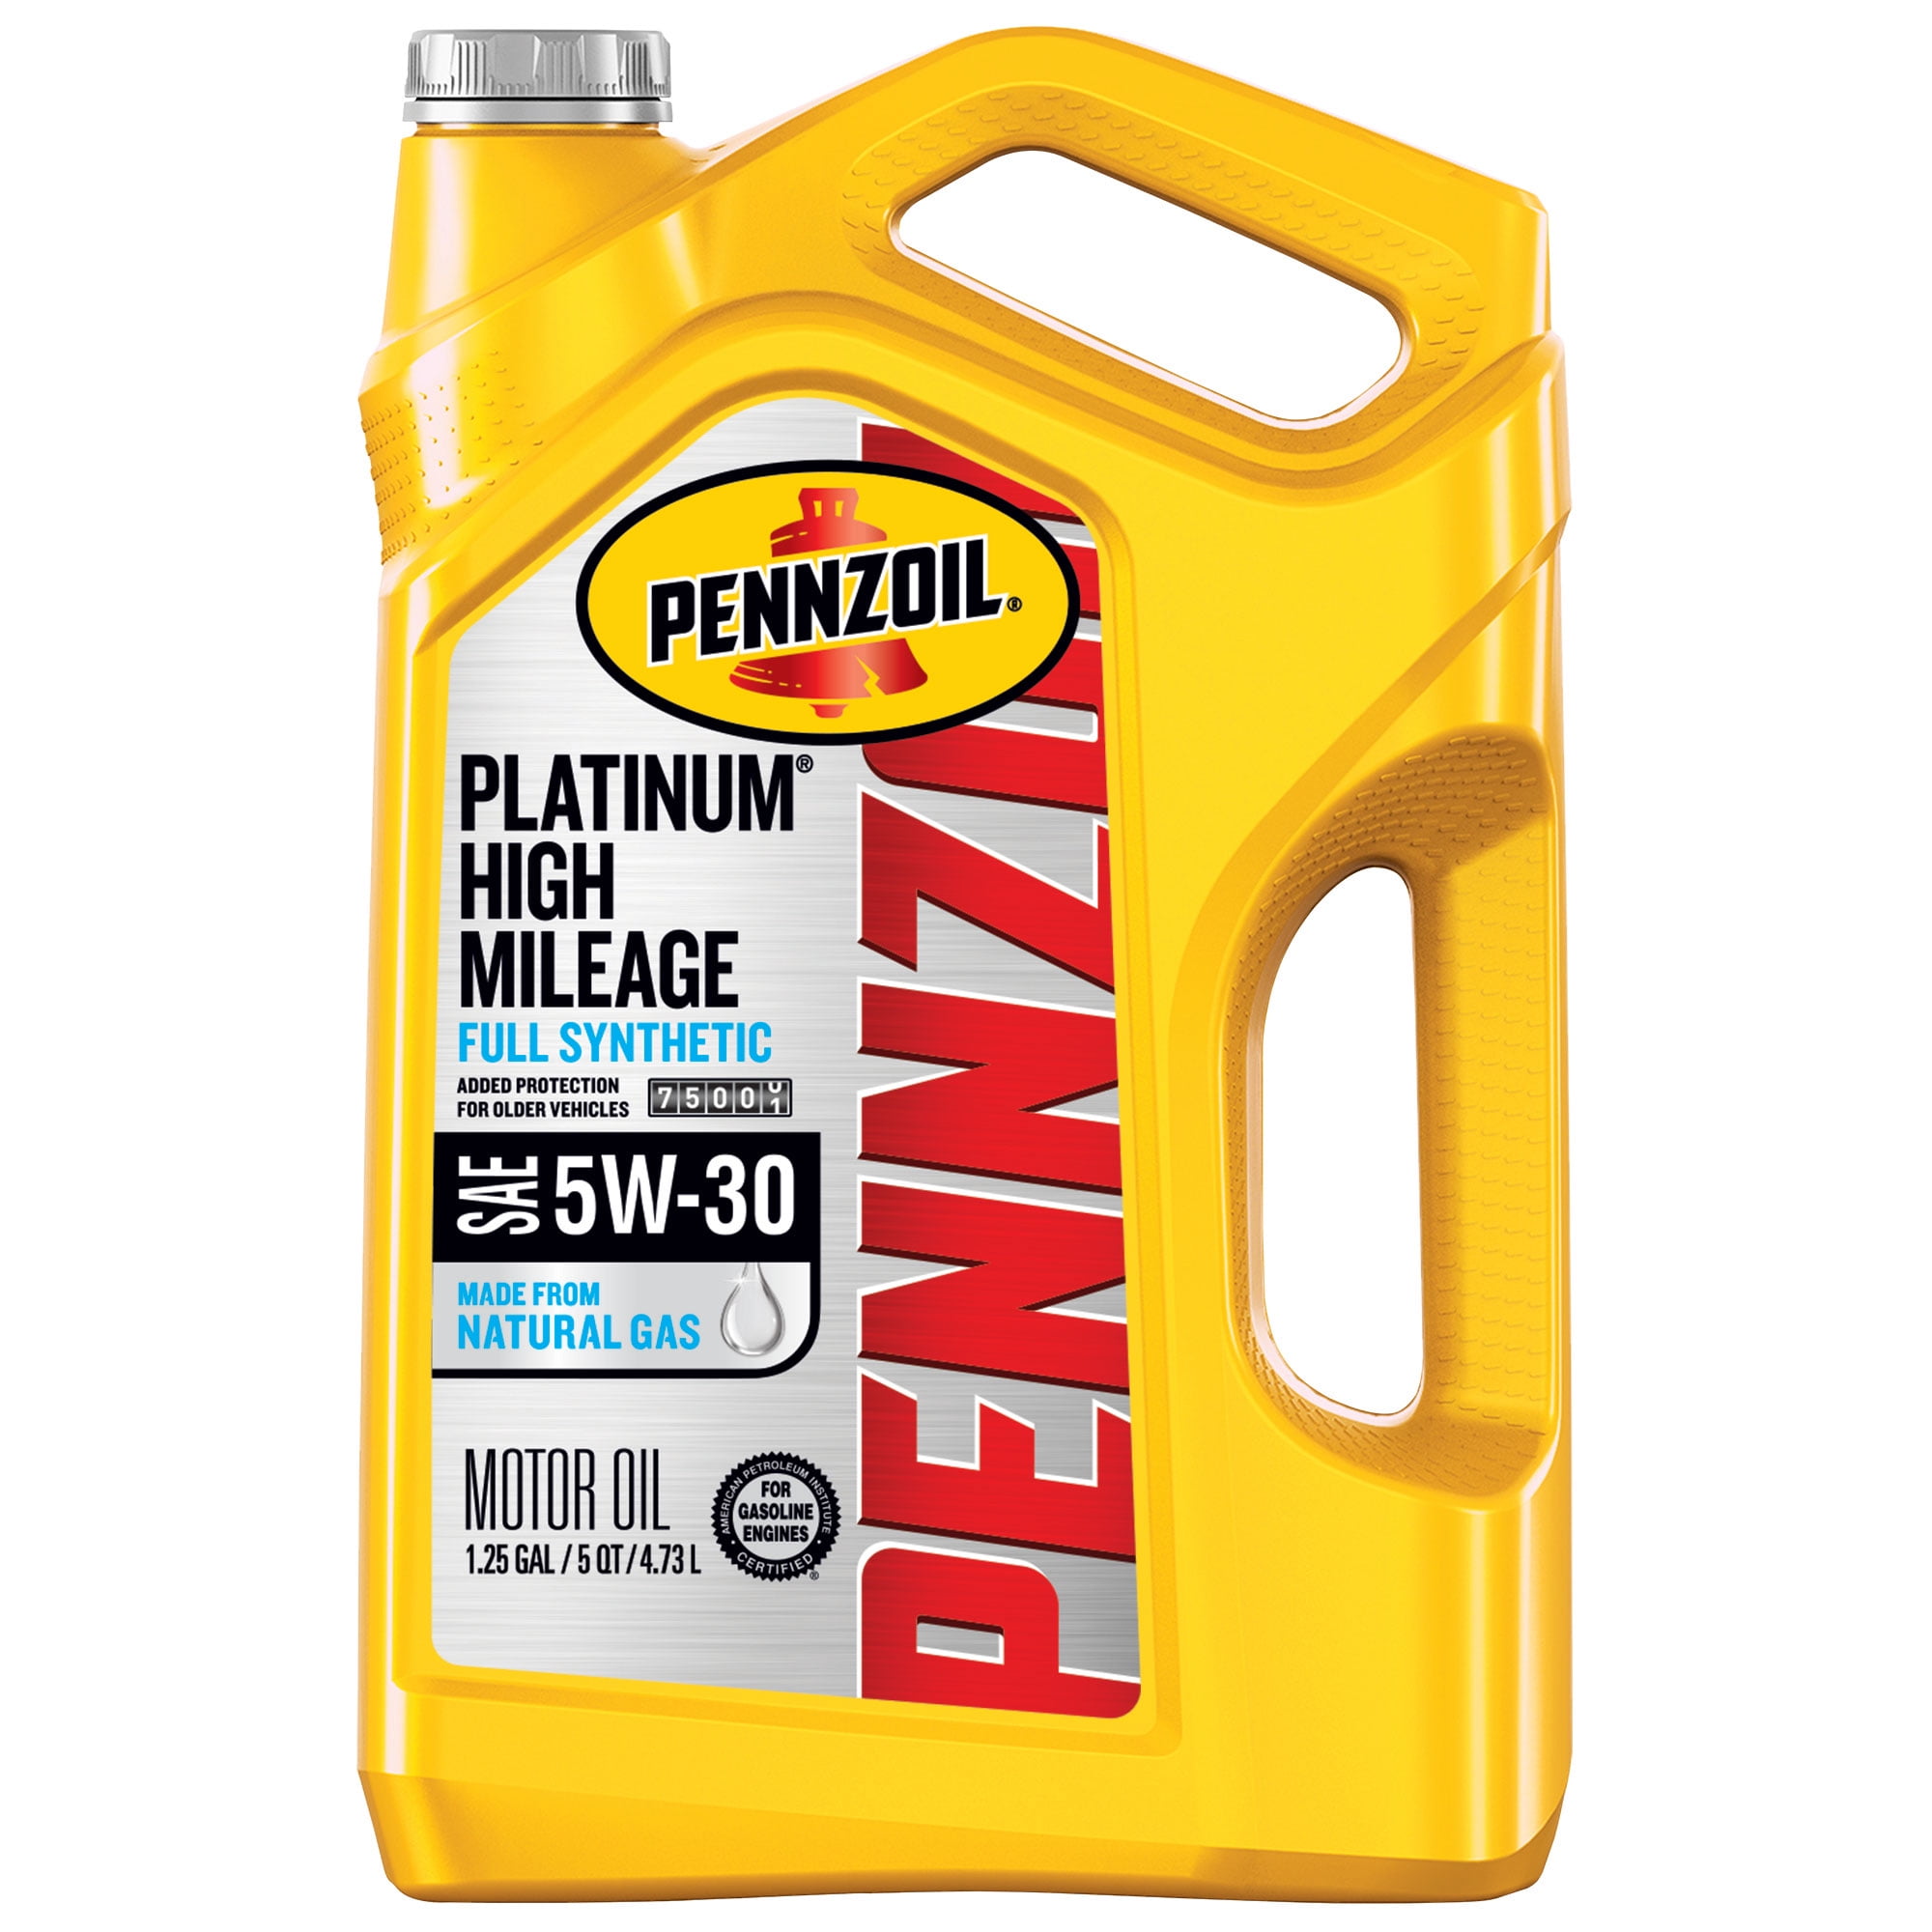 Buy Pennzoil Platinum High Mileage Full Synthetic 5W 30 Motor Oil 5 